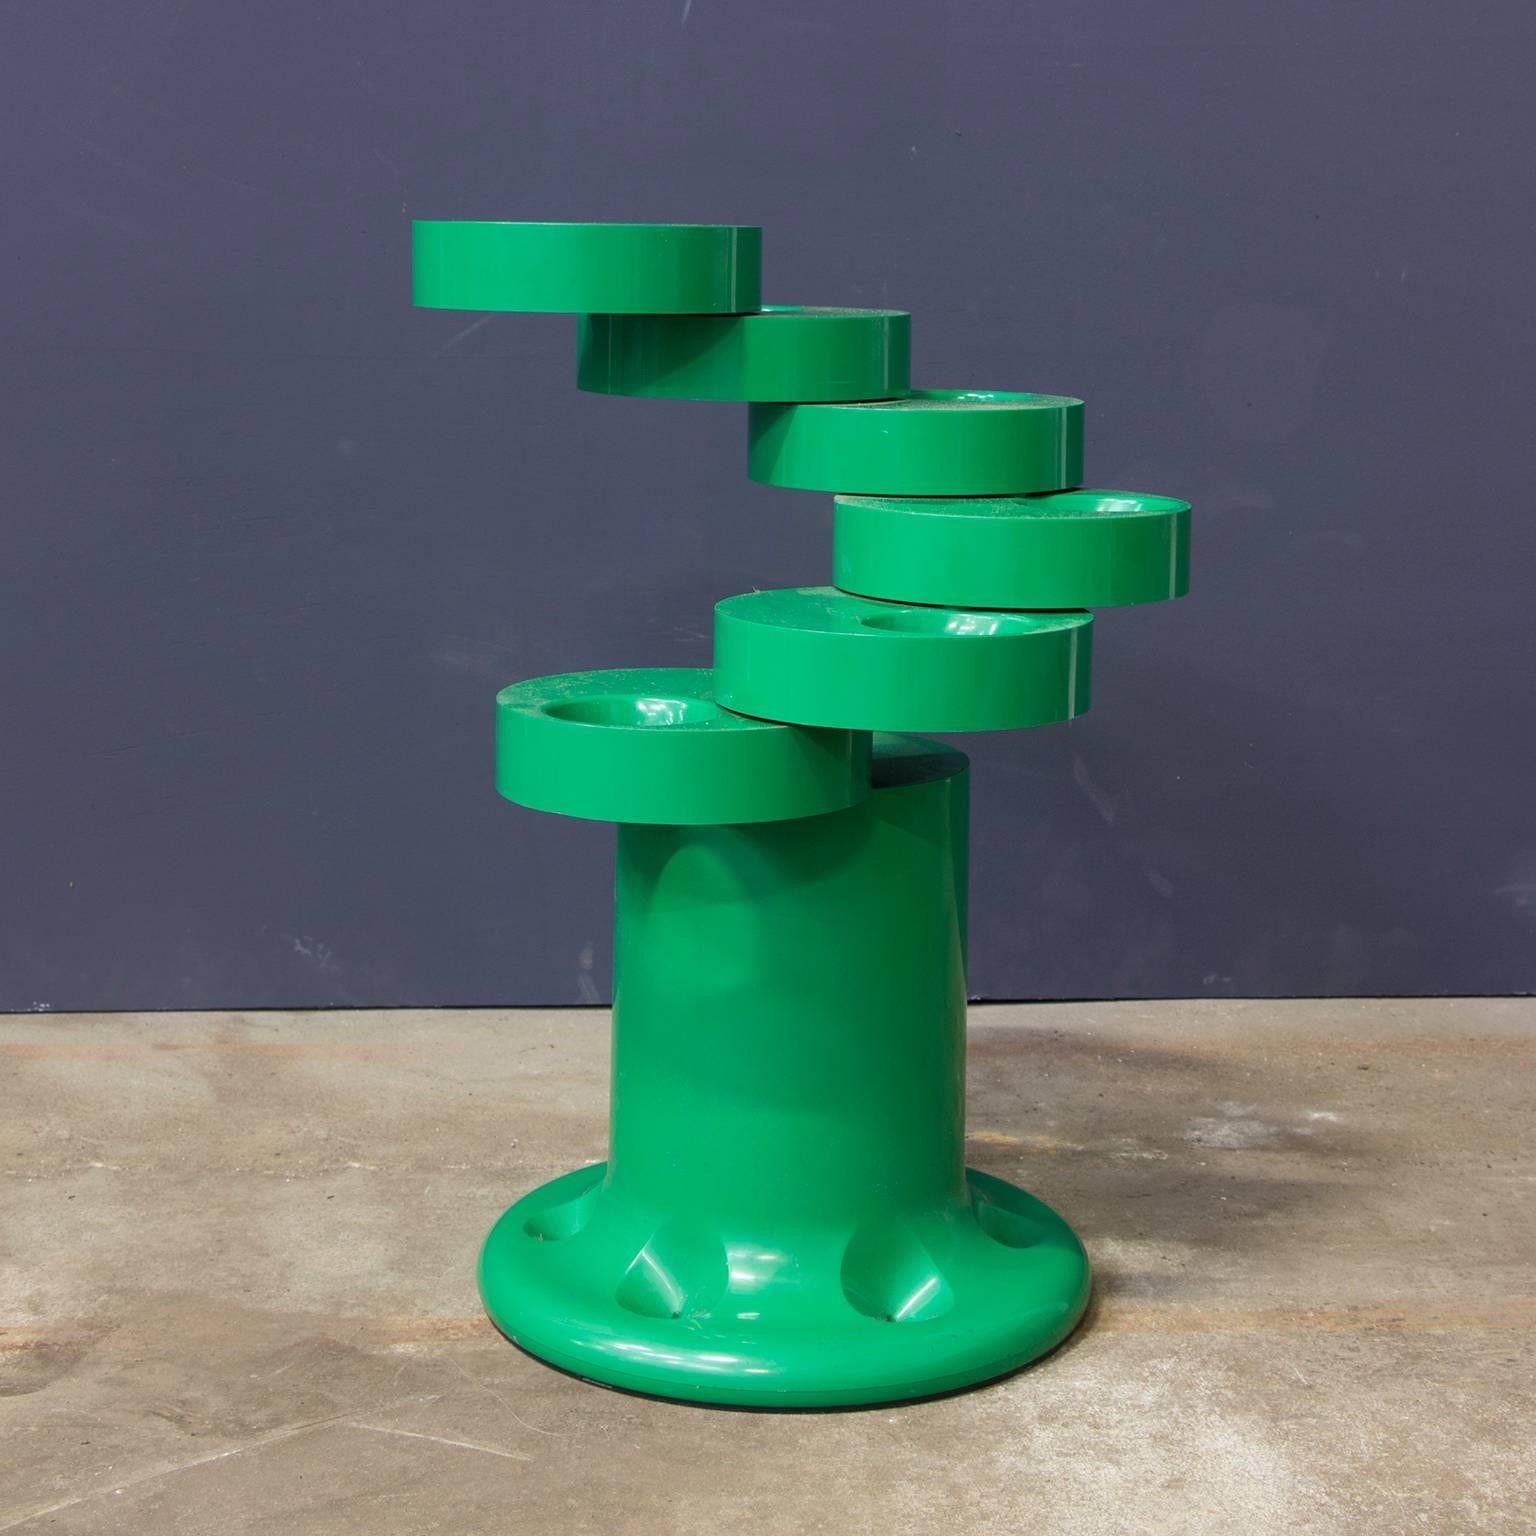 Supercool and rare green Pluvium umbrella stand by Giancarlo Piretti for Anonima Castelli. Each ring on the stand opens individually to hold six umbrellas. The base features indents where the umbrella points sit.

Very good condition, except for a